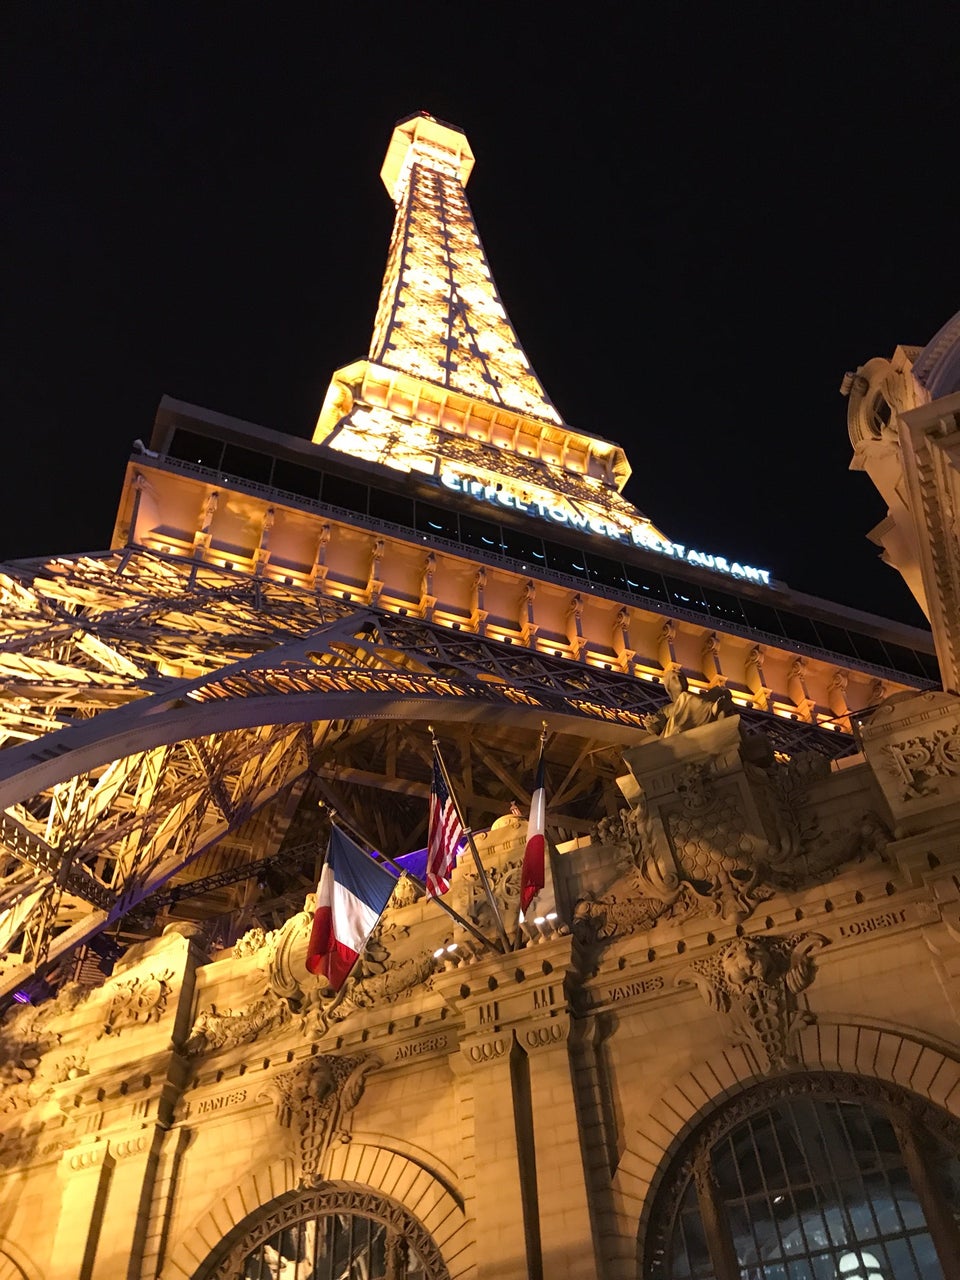 Las Vegas Attractions FLY LINQ & Eiffel Tower Viewing Deck at Paris Reopen